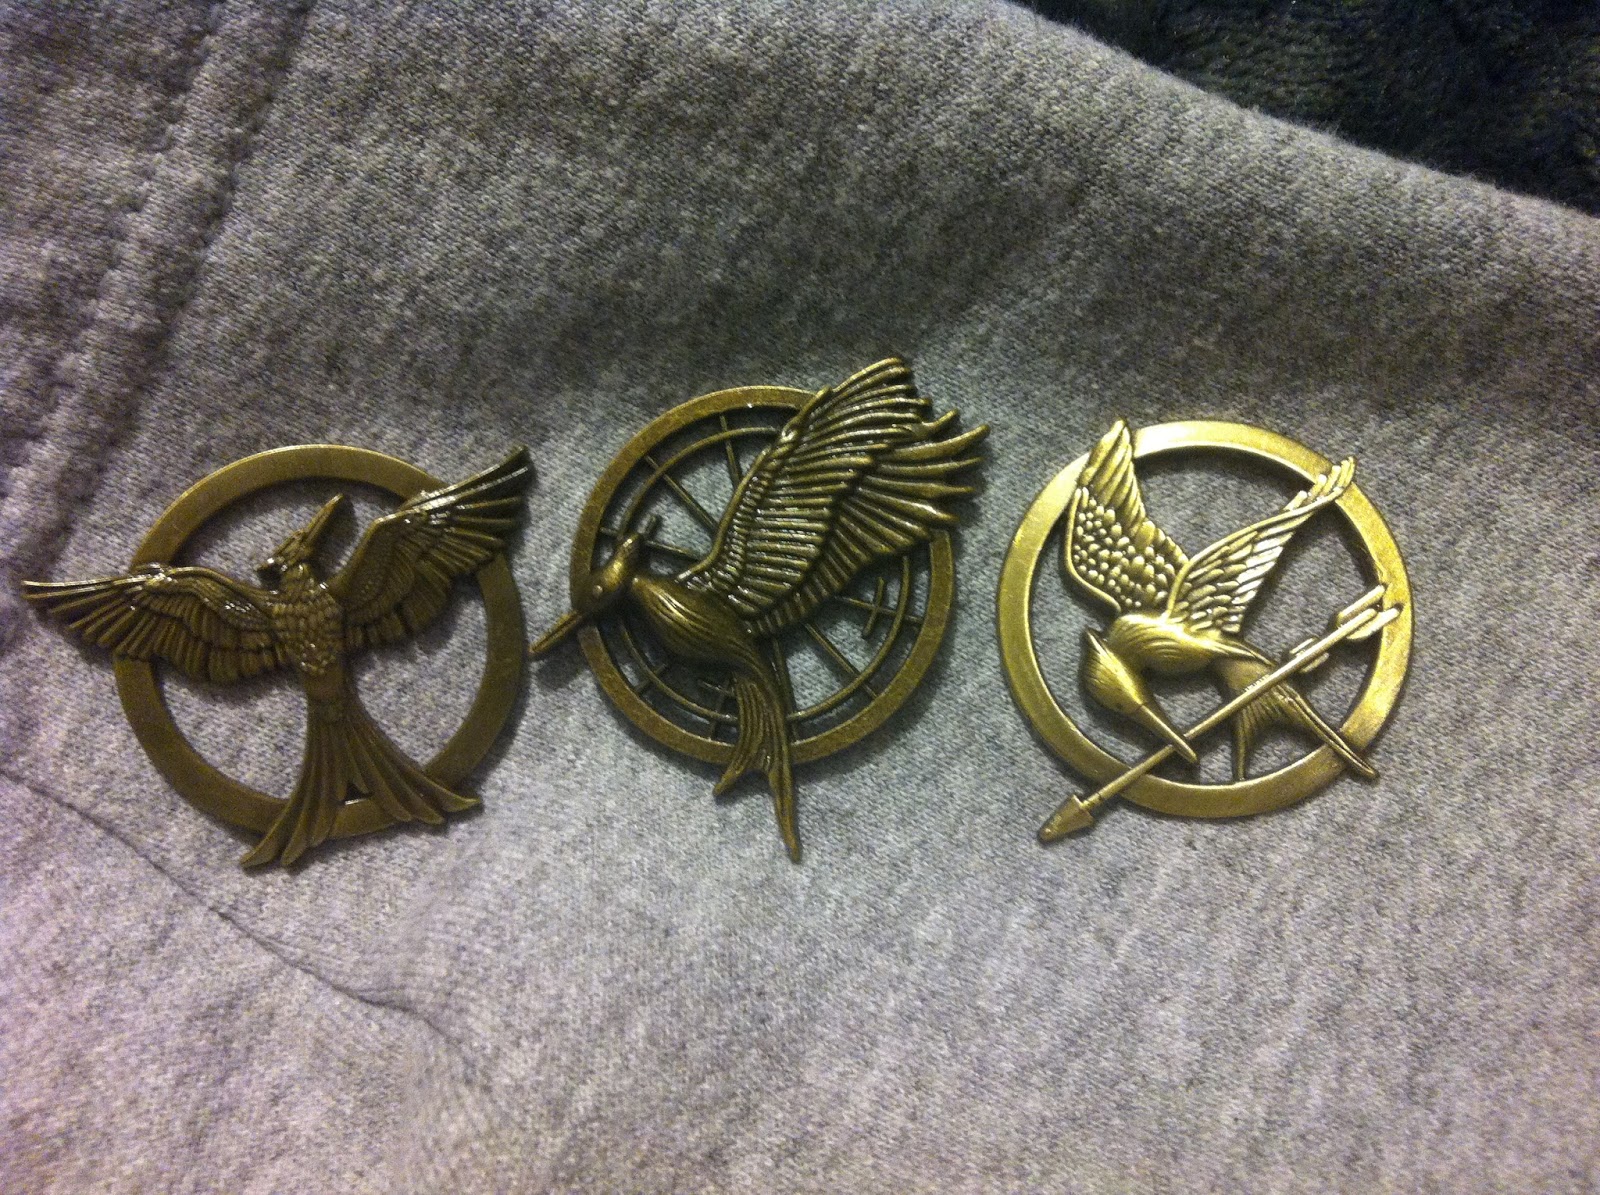 Download Mockingjay Pins - Merchandise Review